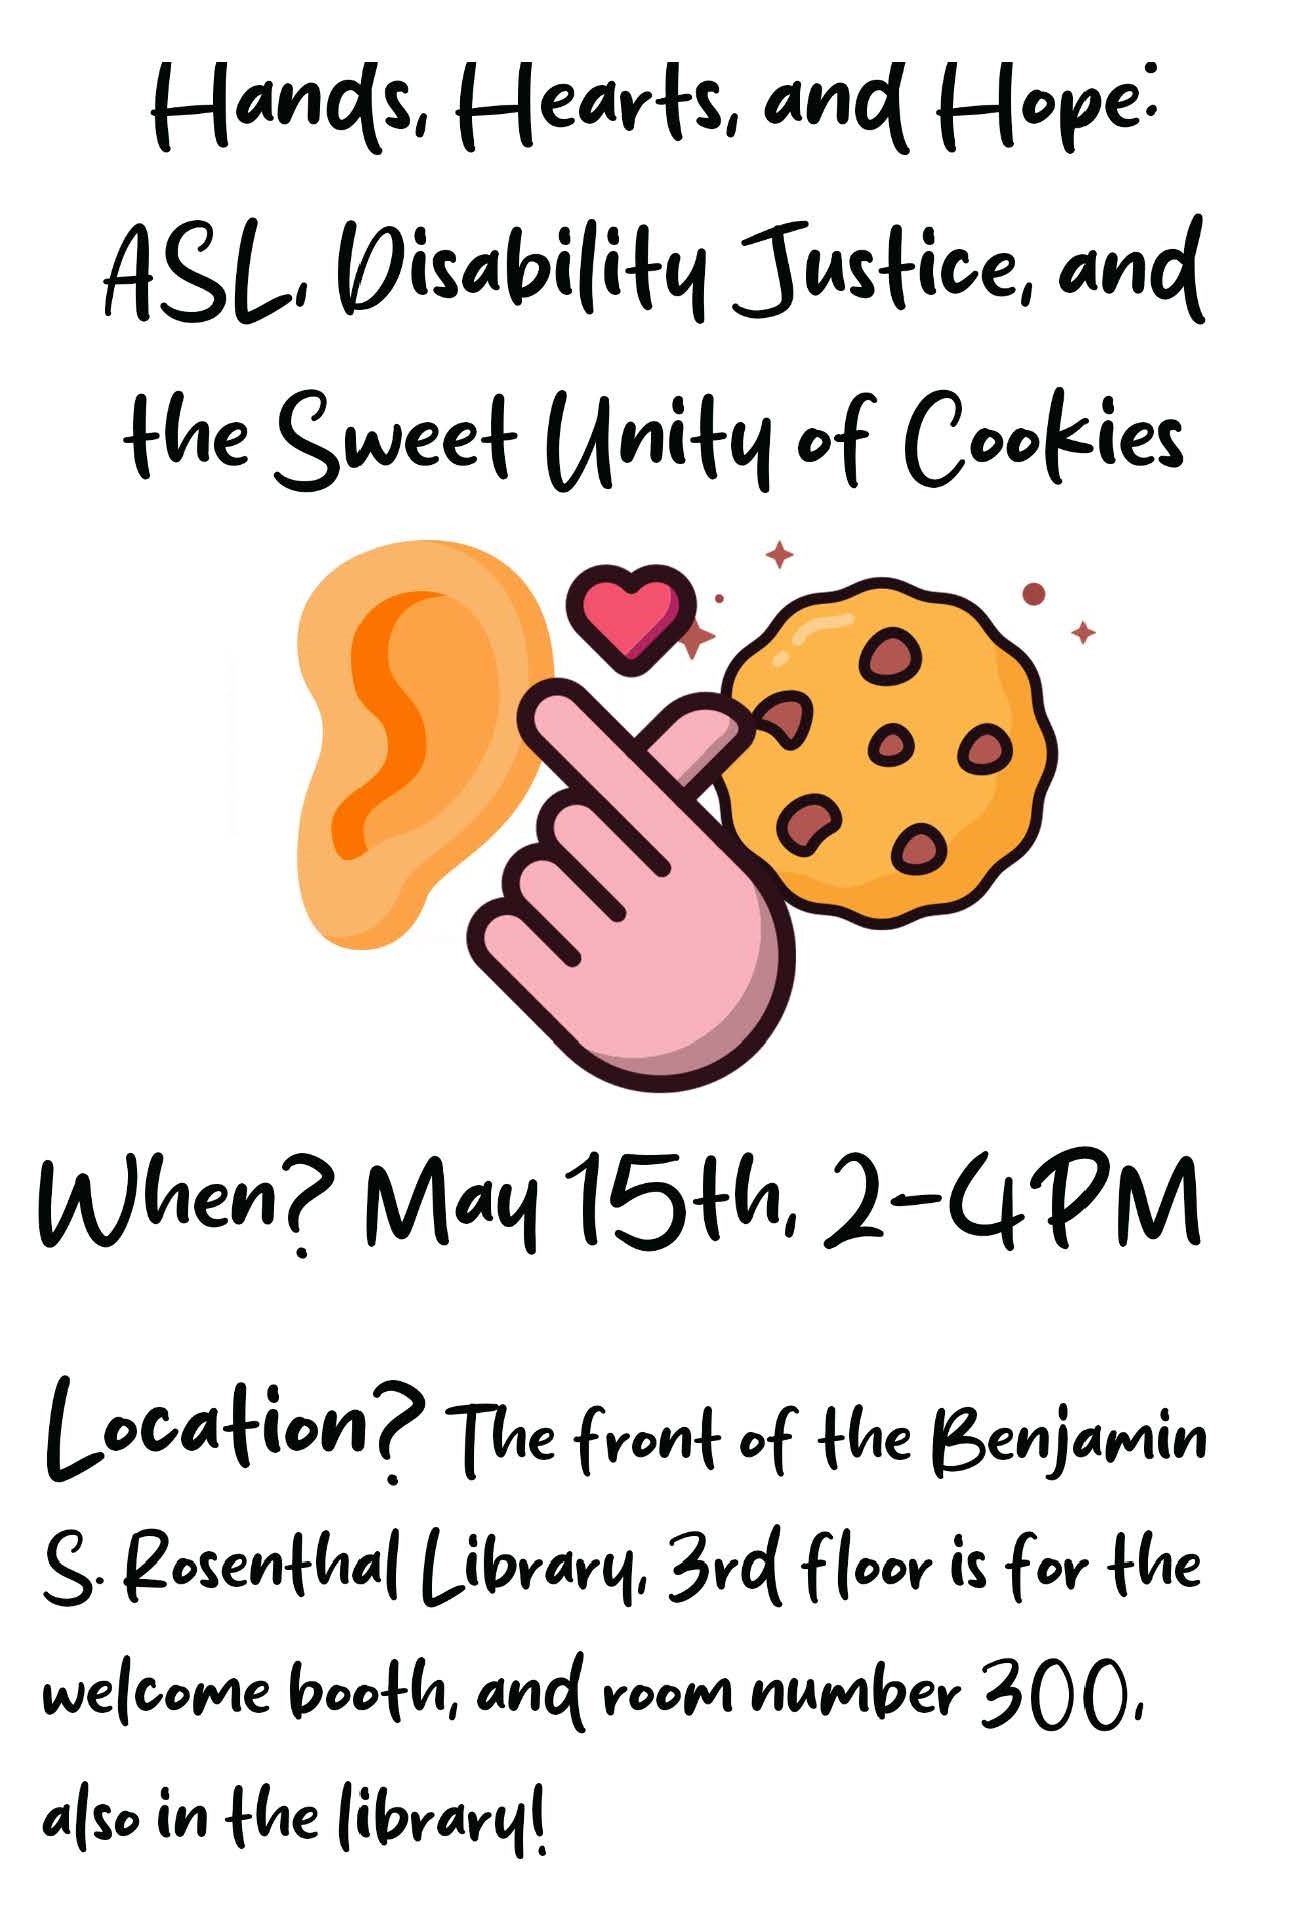 Join Deaf Power! for “Hands, Hearts, and Hope: ASL, Disability Justice, and the Sweet Unity of Cookies”